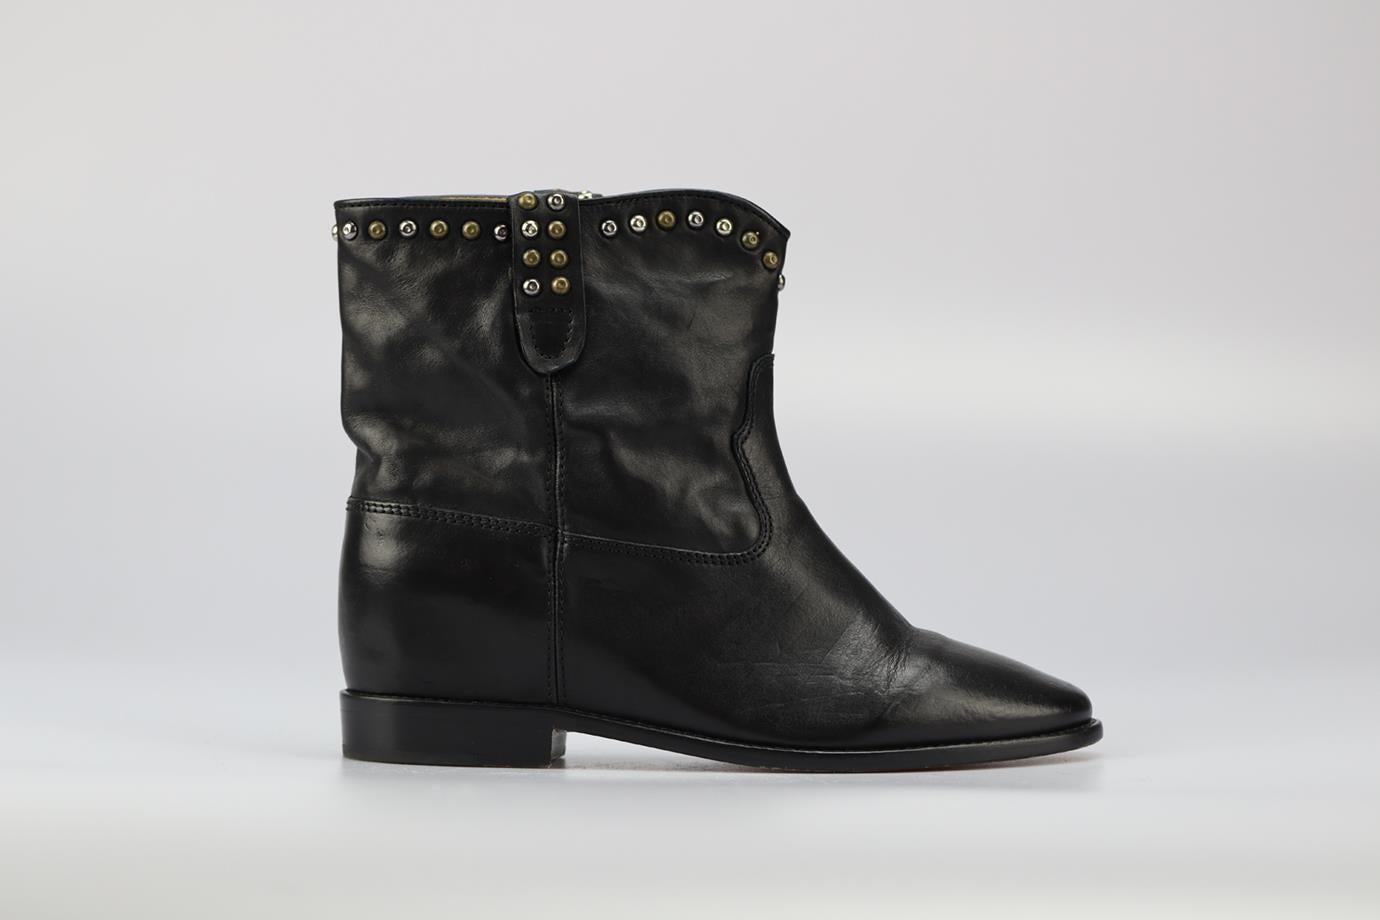 Isabel Marant Studded Leather Wedge Ankle Boots. Black. Pull on. Does not come with - dustbag or box. EU 41 (UK 8, US 11). Insole: 10.5 in. Heel height: 3.5 in. Shaft: 4.4 in. Condition: Used. Very good condition - Light wear to soles and upper